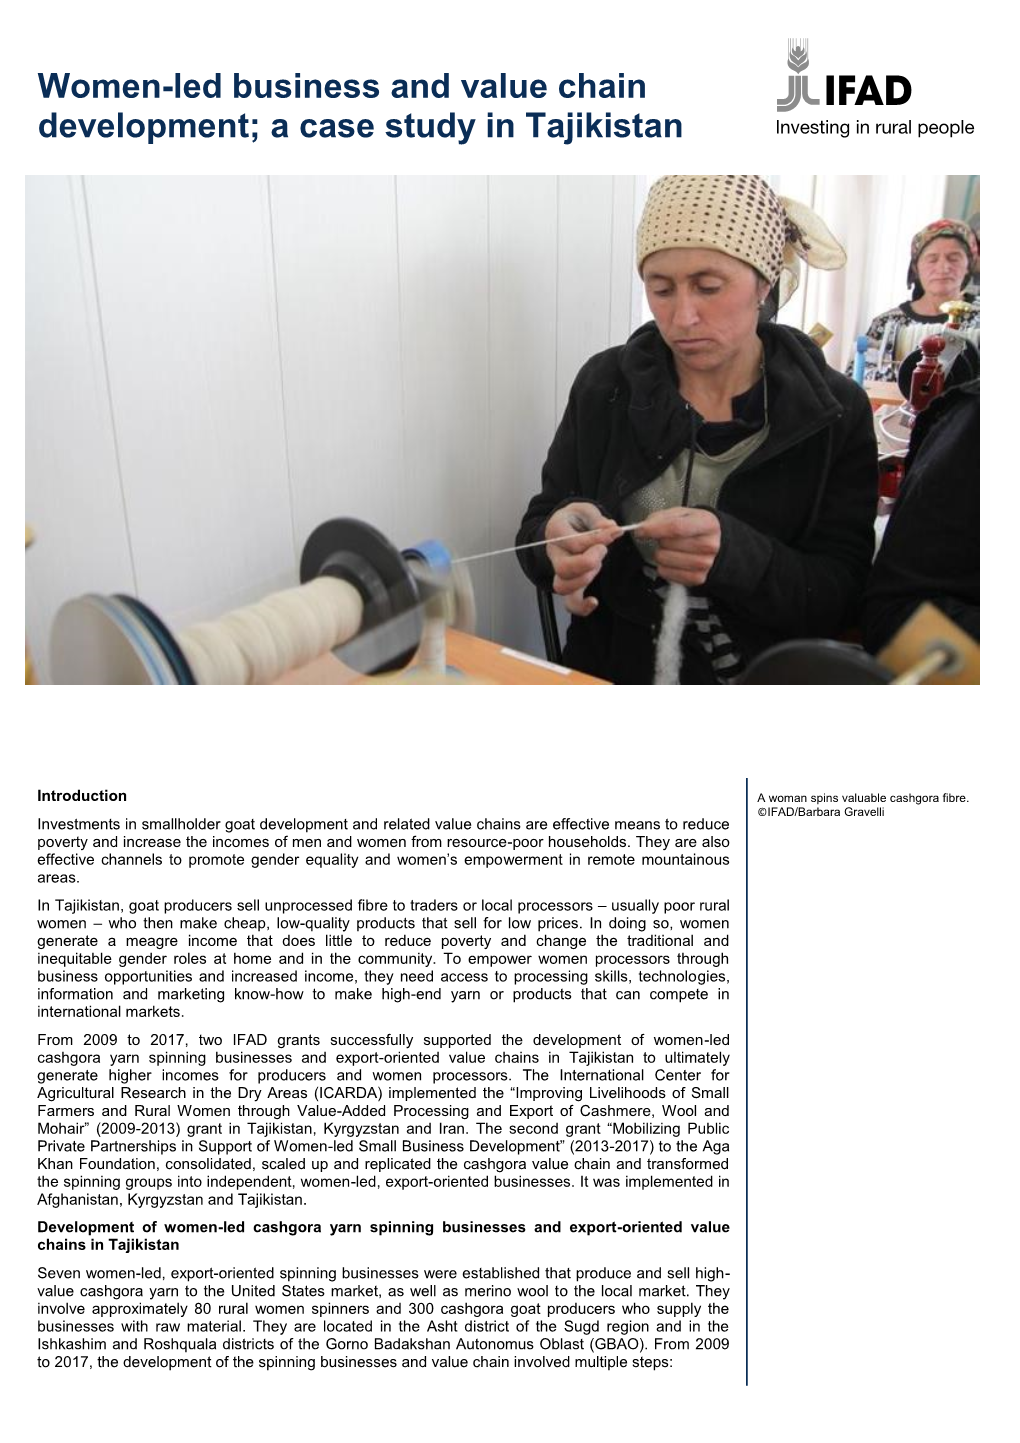 Women-Led Business and Value Chain Development; a Case Study in Tajikistan